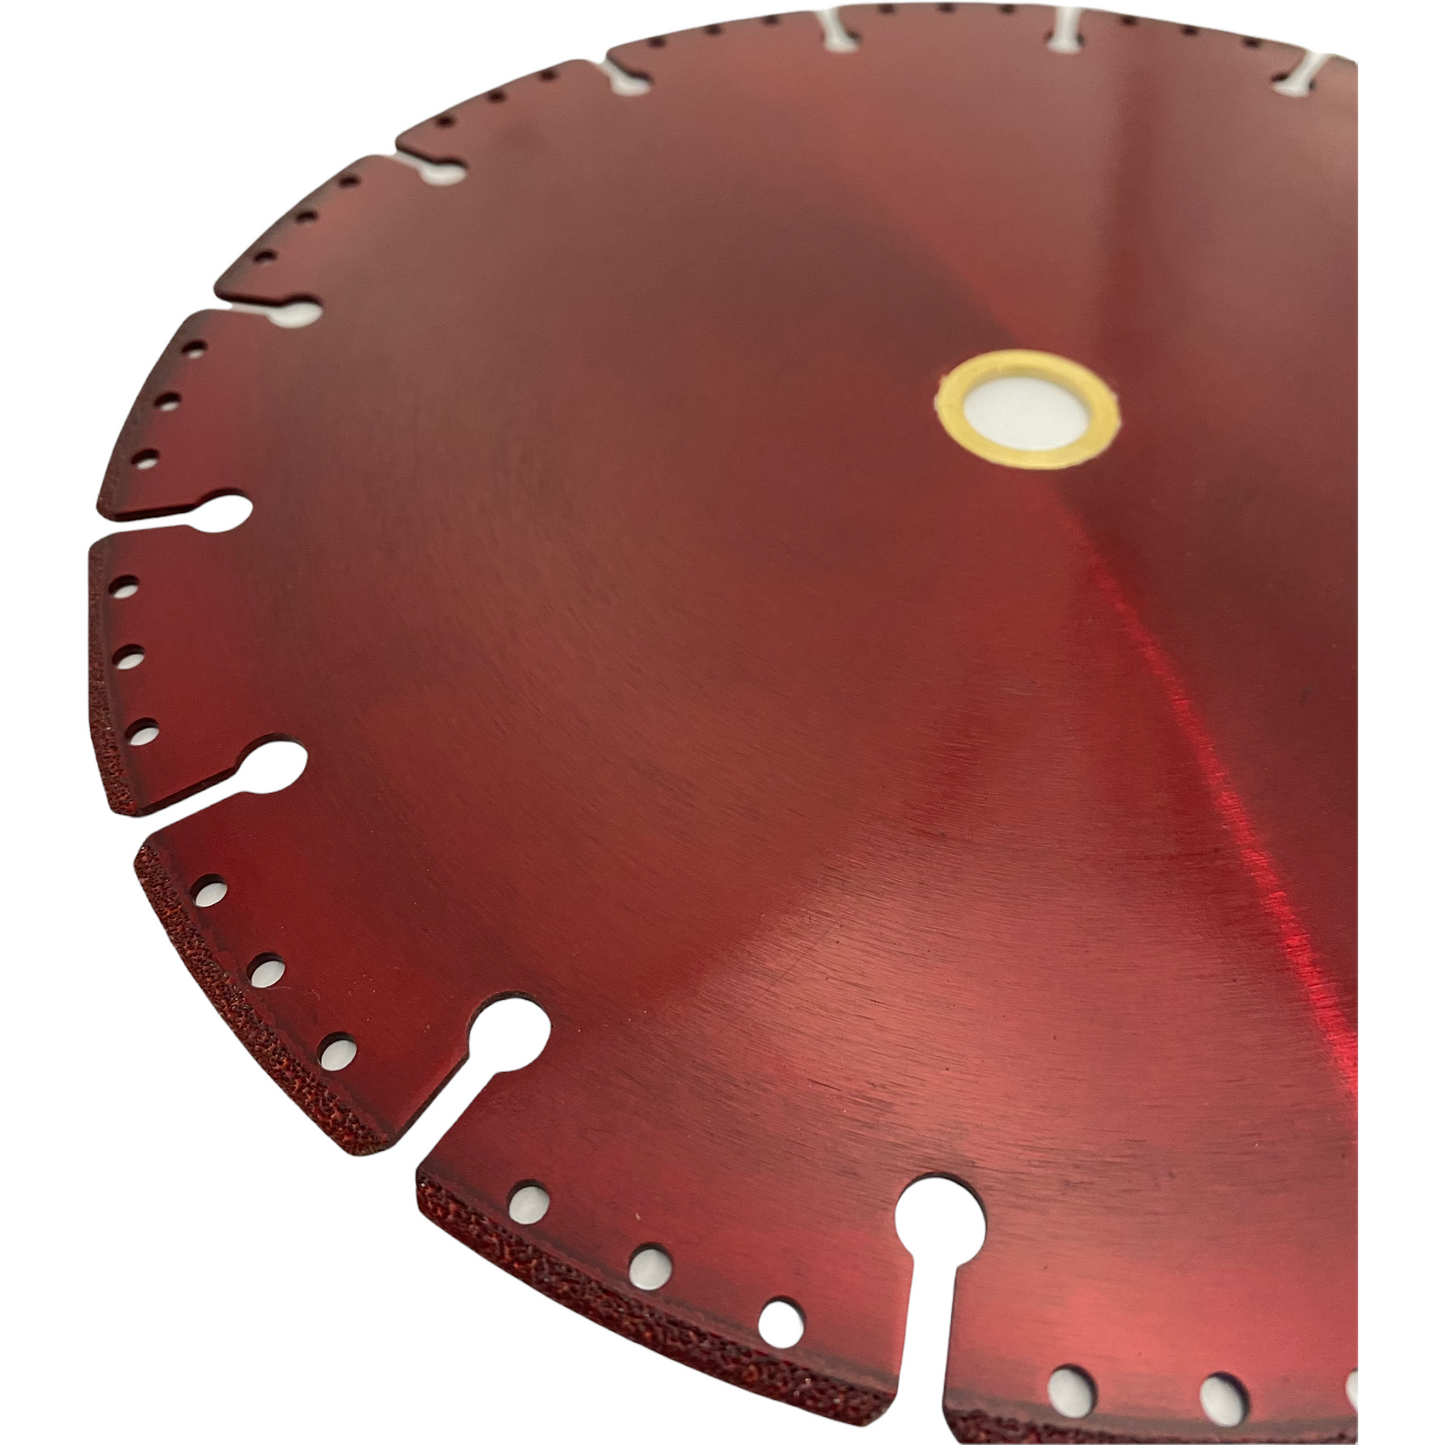  9” Battery Diamond Blade 9" DIAMOND BLADES FOR BATTERY POWERED CUT-OFF SAWS